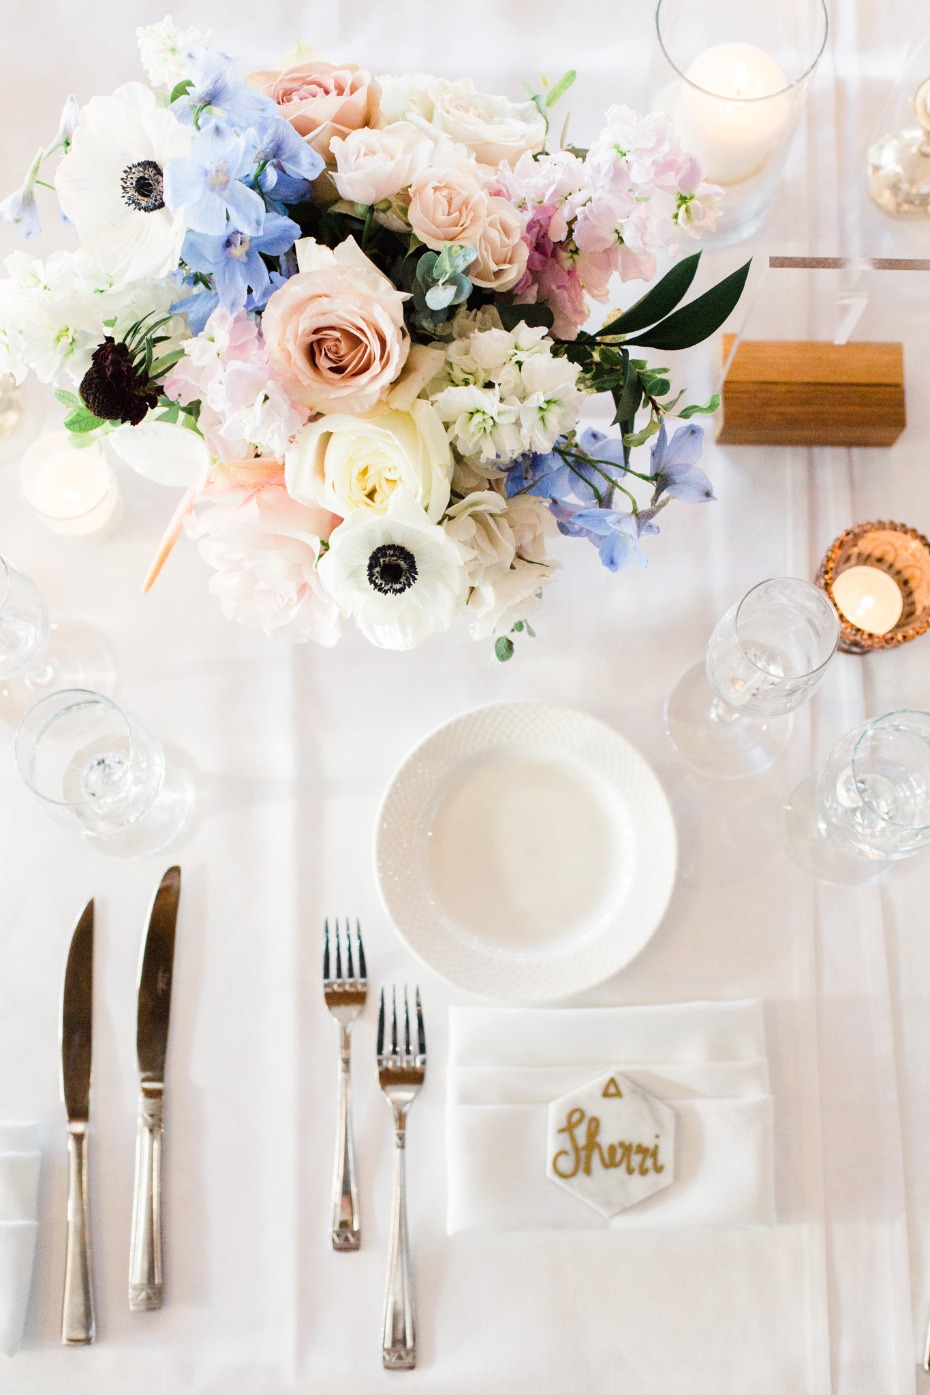 Beautiful and simple place setting